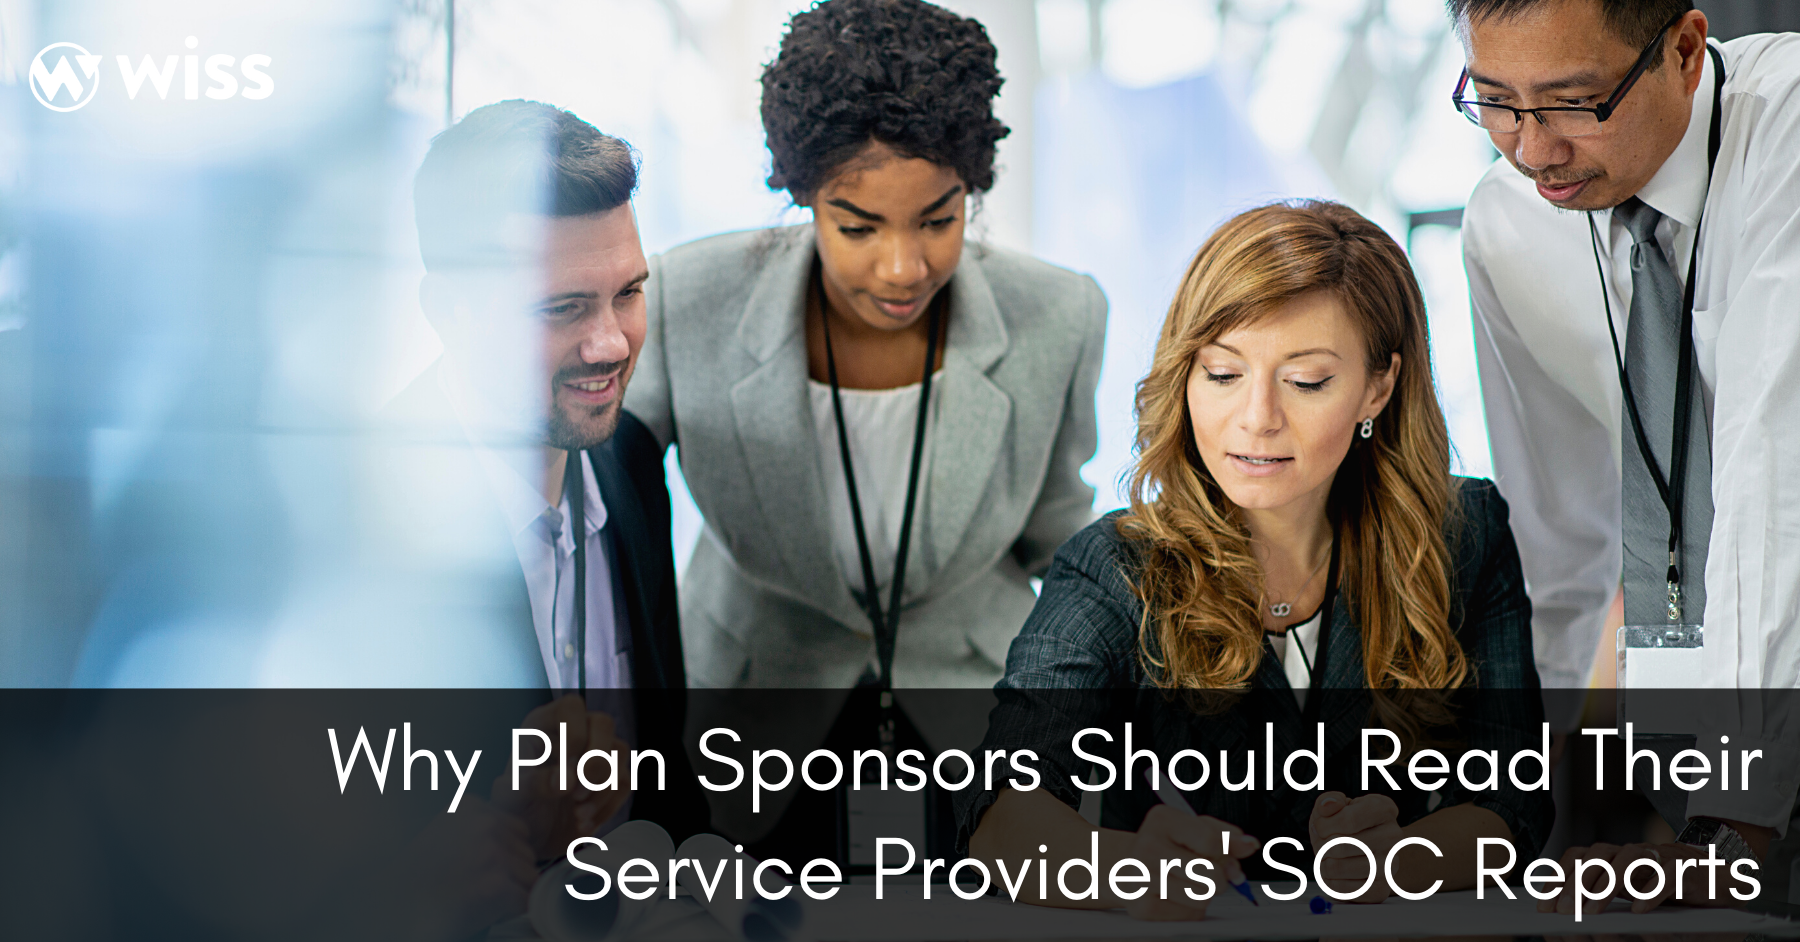 Why Plan Sponsors Should Read Their Service Providers’ SOC Reports